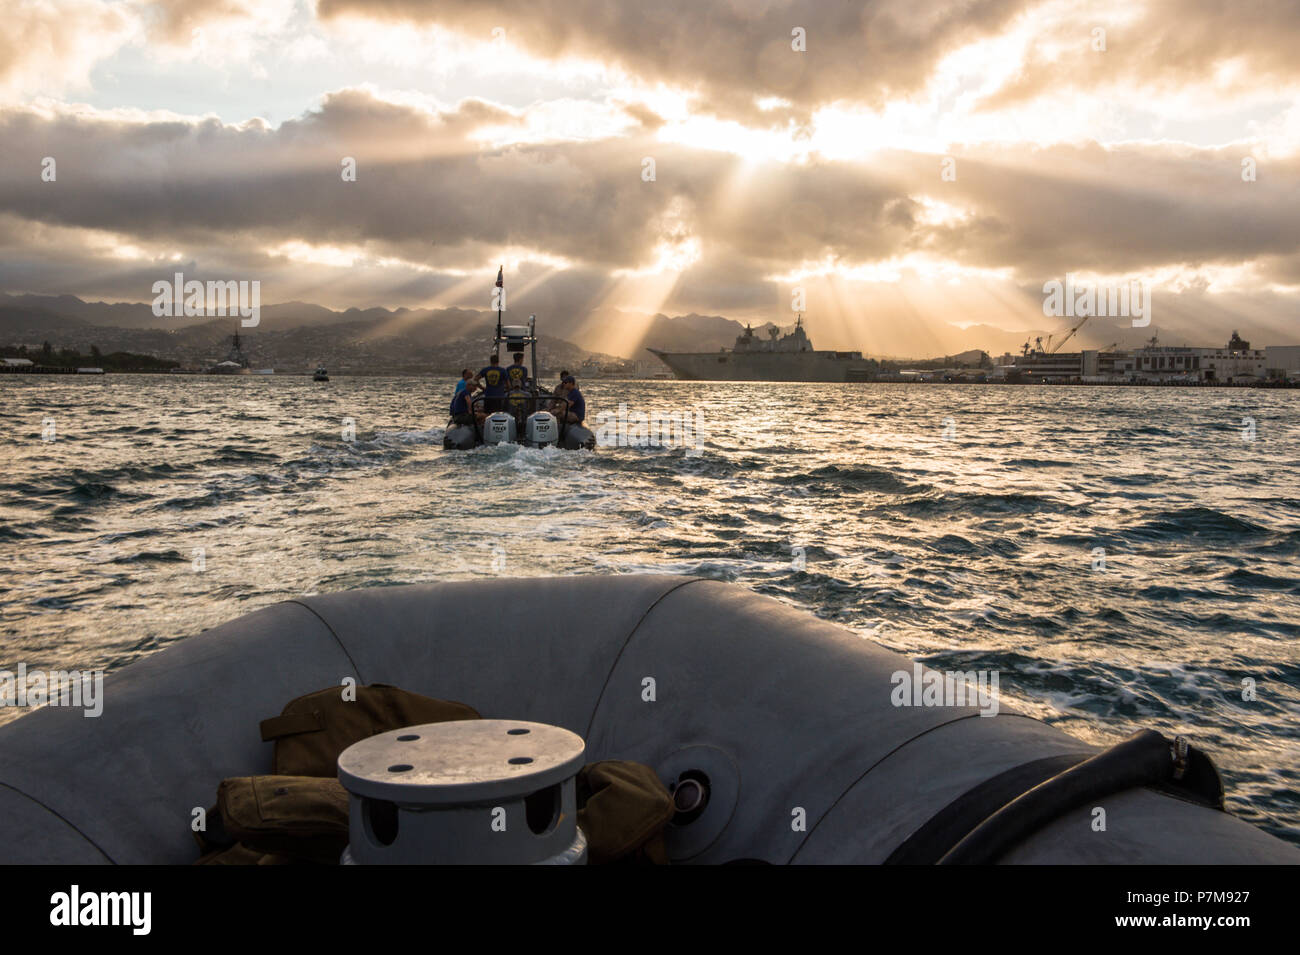 180706-N-FV745-1144 PEARL HARBOR (July 6, 2018) Navy Divers, assigned to Mobile Diving Salvage Unit (MDSU) 1, transit to the USS Arizona Memorial for a dive during the Rim of the Pacific (RIMPAC) 2018 exercise, July 7. Twenty-five nations, 46 ships, five submarines, about 200 aircraft, and 25,000 personnel are participating in RIMPAC from June 27 to Aug. 2 in and around the Hawaiian Islands and Southern California. The world’s largest international maritime exercise, RIMPAC provides a unique training opportunity while fostering and sustaining cooperative relationships among participants critic Stock Photo